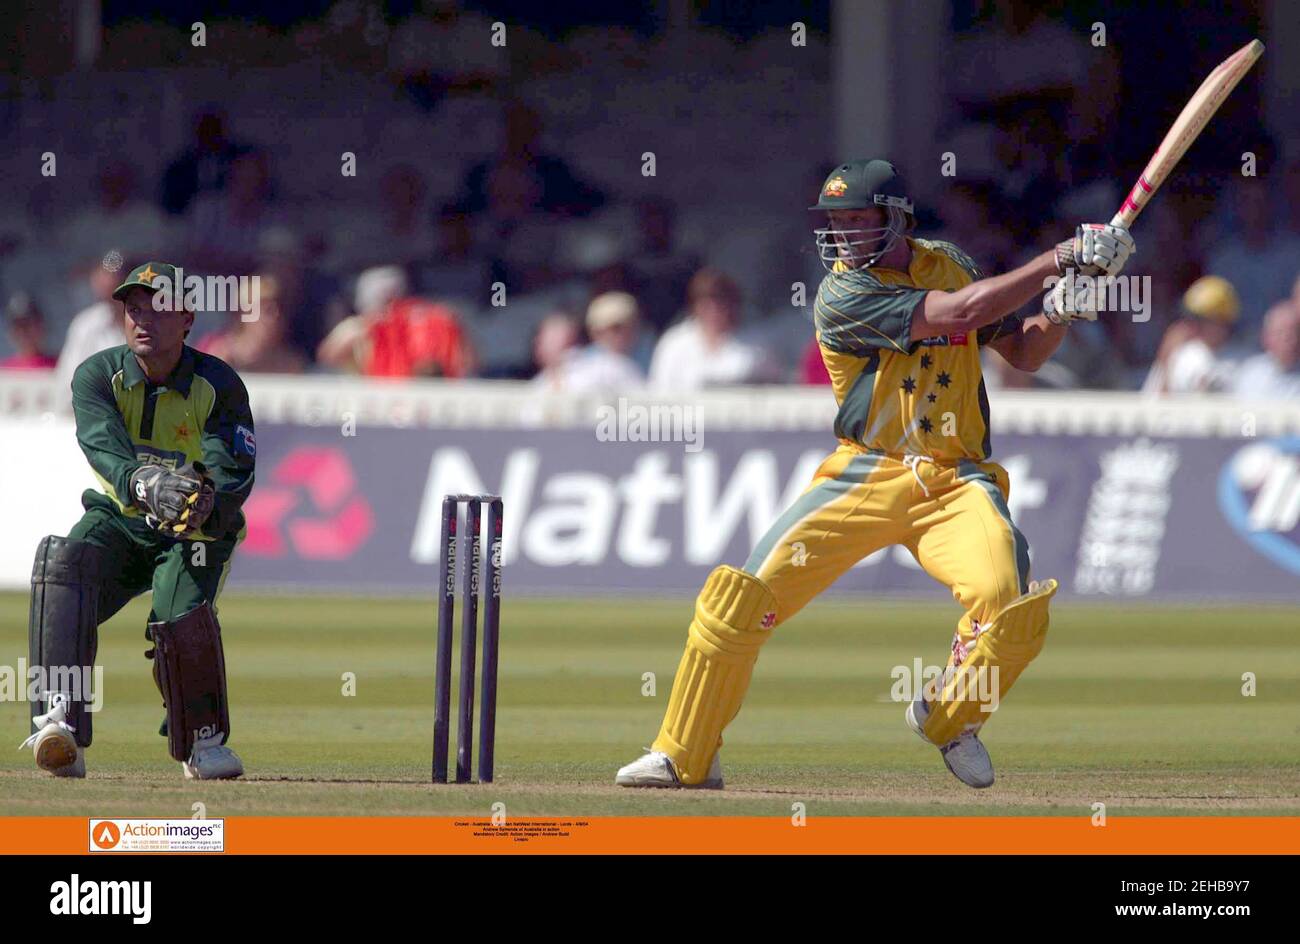 Cricket - Australia v Pakistan NatWest International - Lord's  - 4/9/04  Andrew Symonds of Australia in action  Mandatory Credit: Action Images / Andrew Budd  Livepic Stock Photo